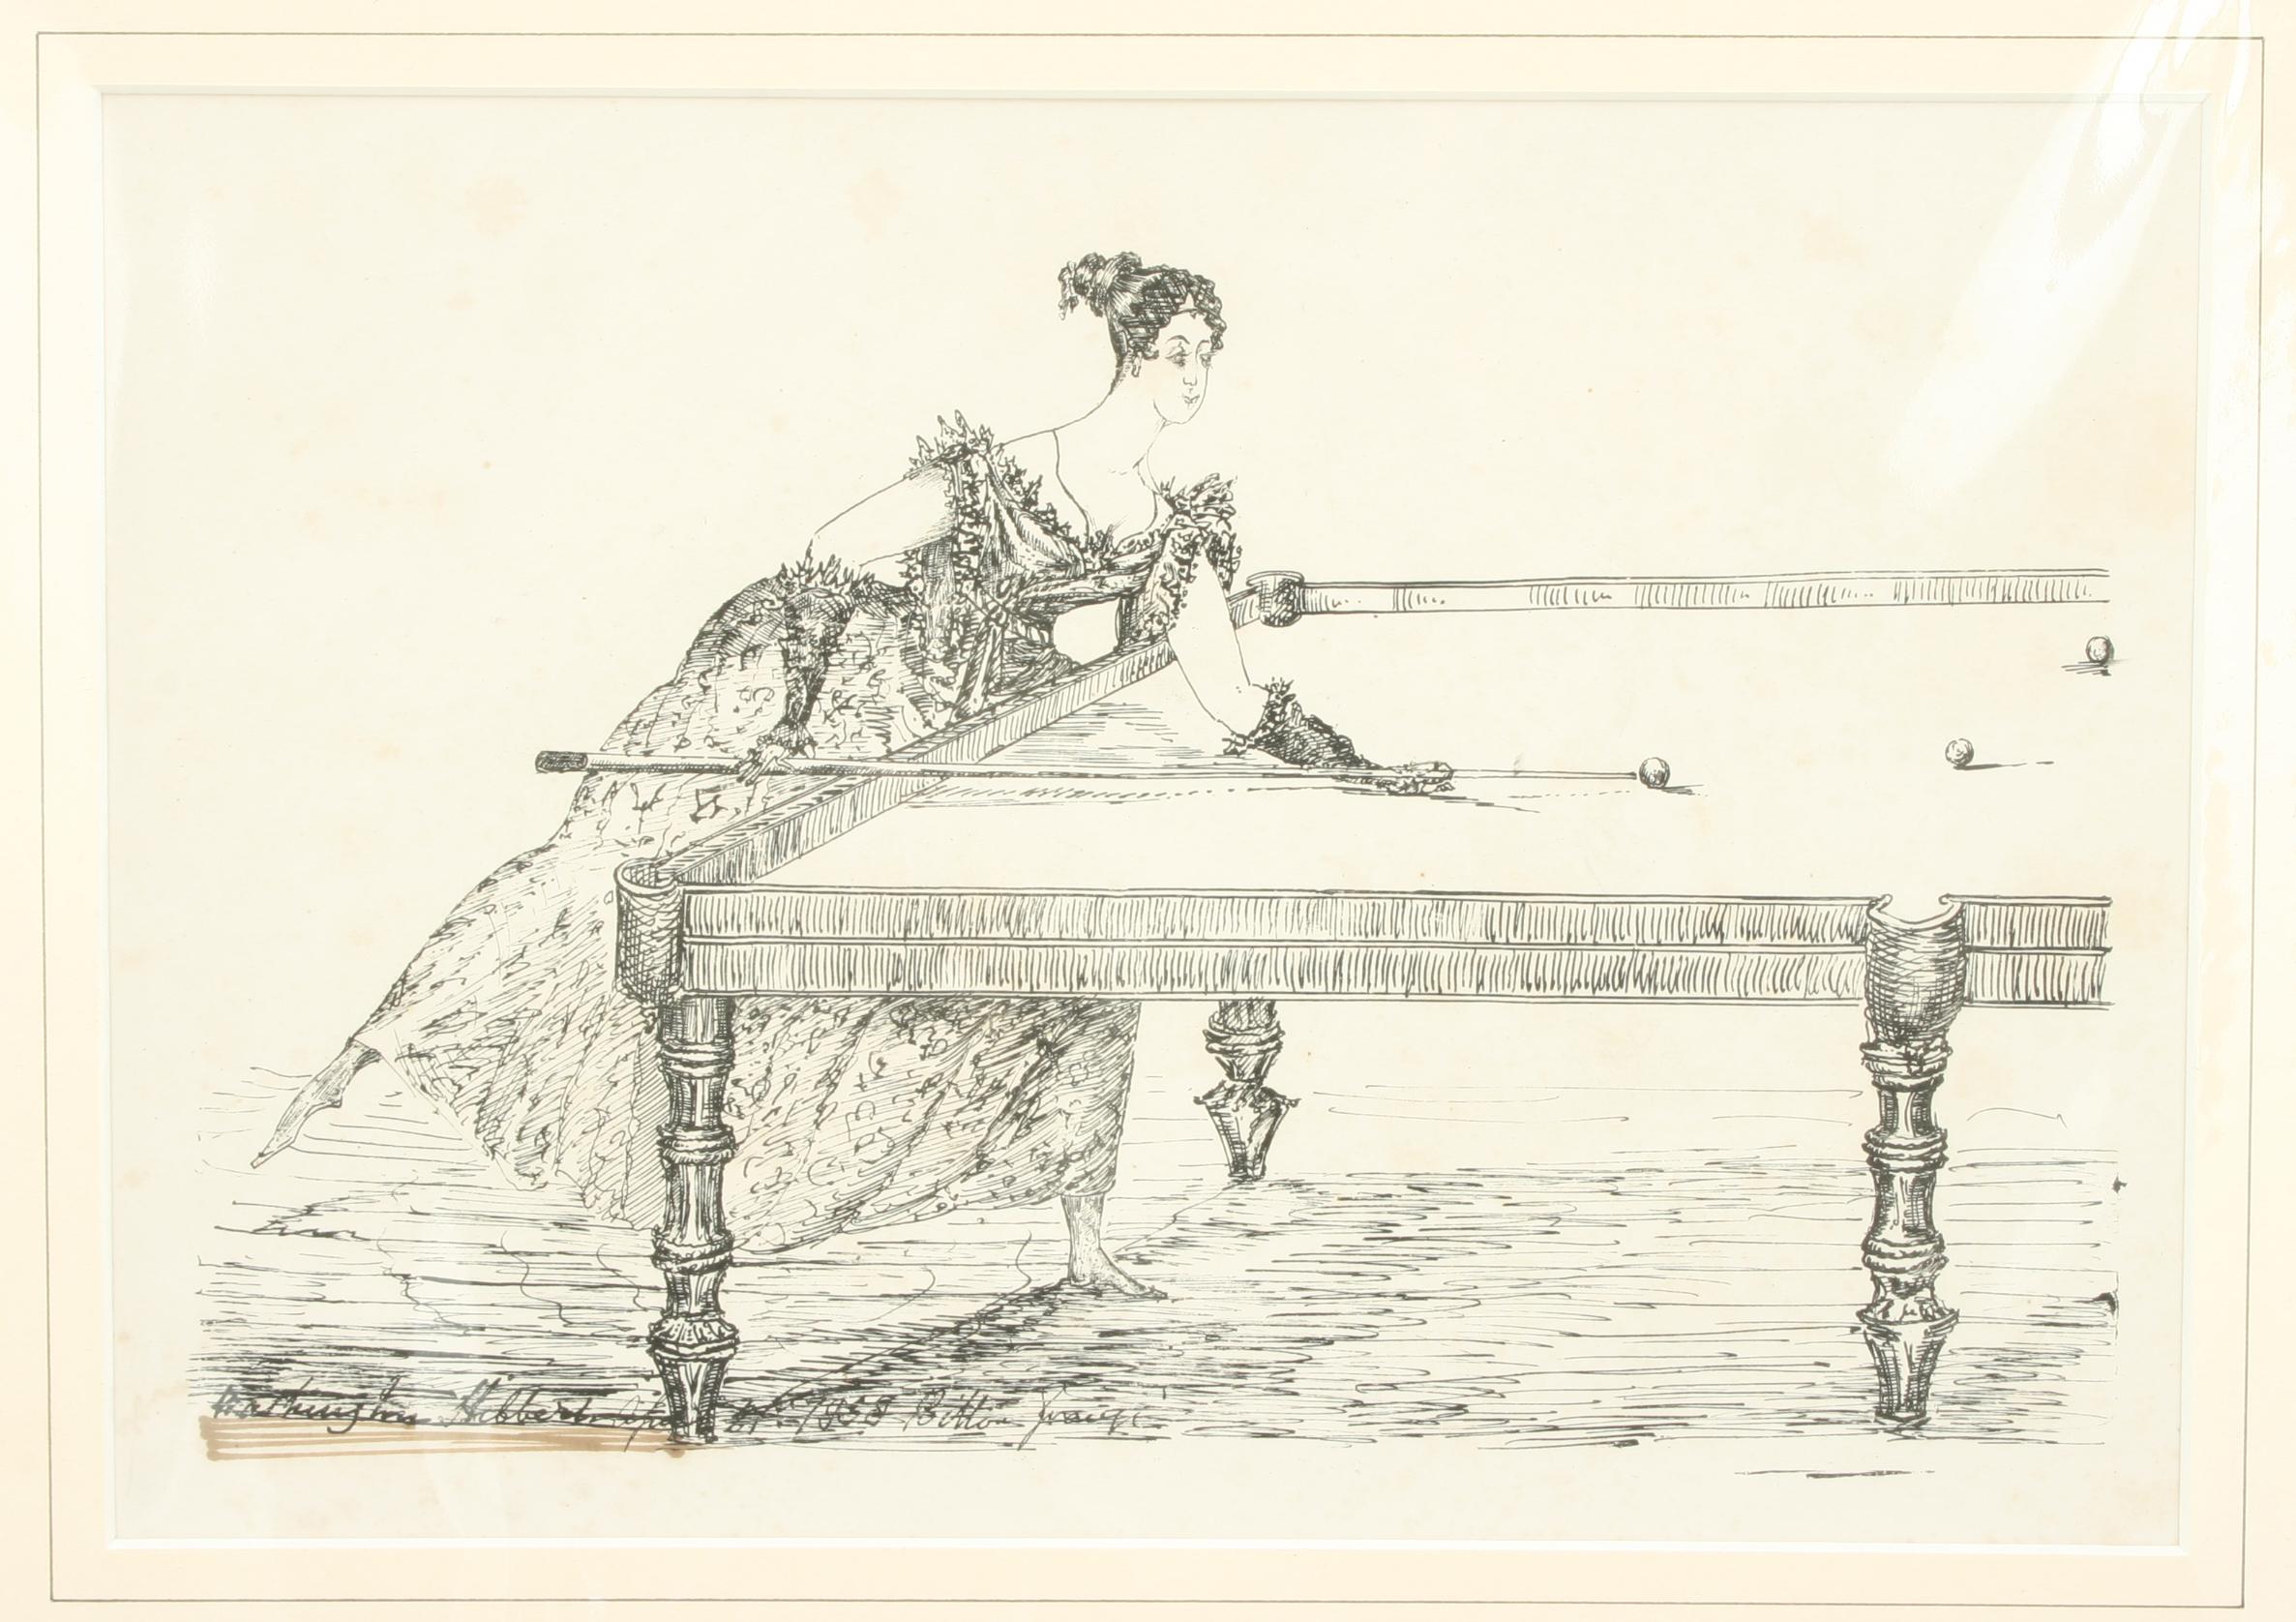 Lady Billiard Player (Julia Tichborne).
A pair of lithographs depicting a female billiard player, possibly the wife of John Hubert Washington Hibbert, Julia Tichborne. They are probably by an amateur hand and are dated 1839, and have an inscription